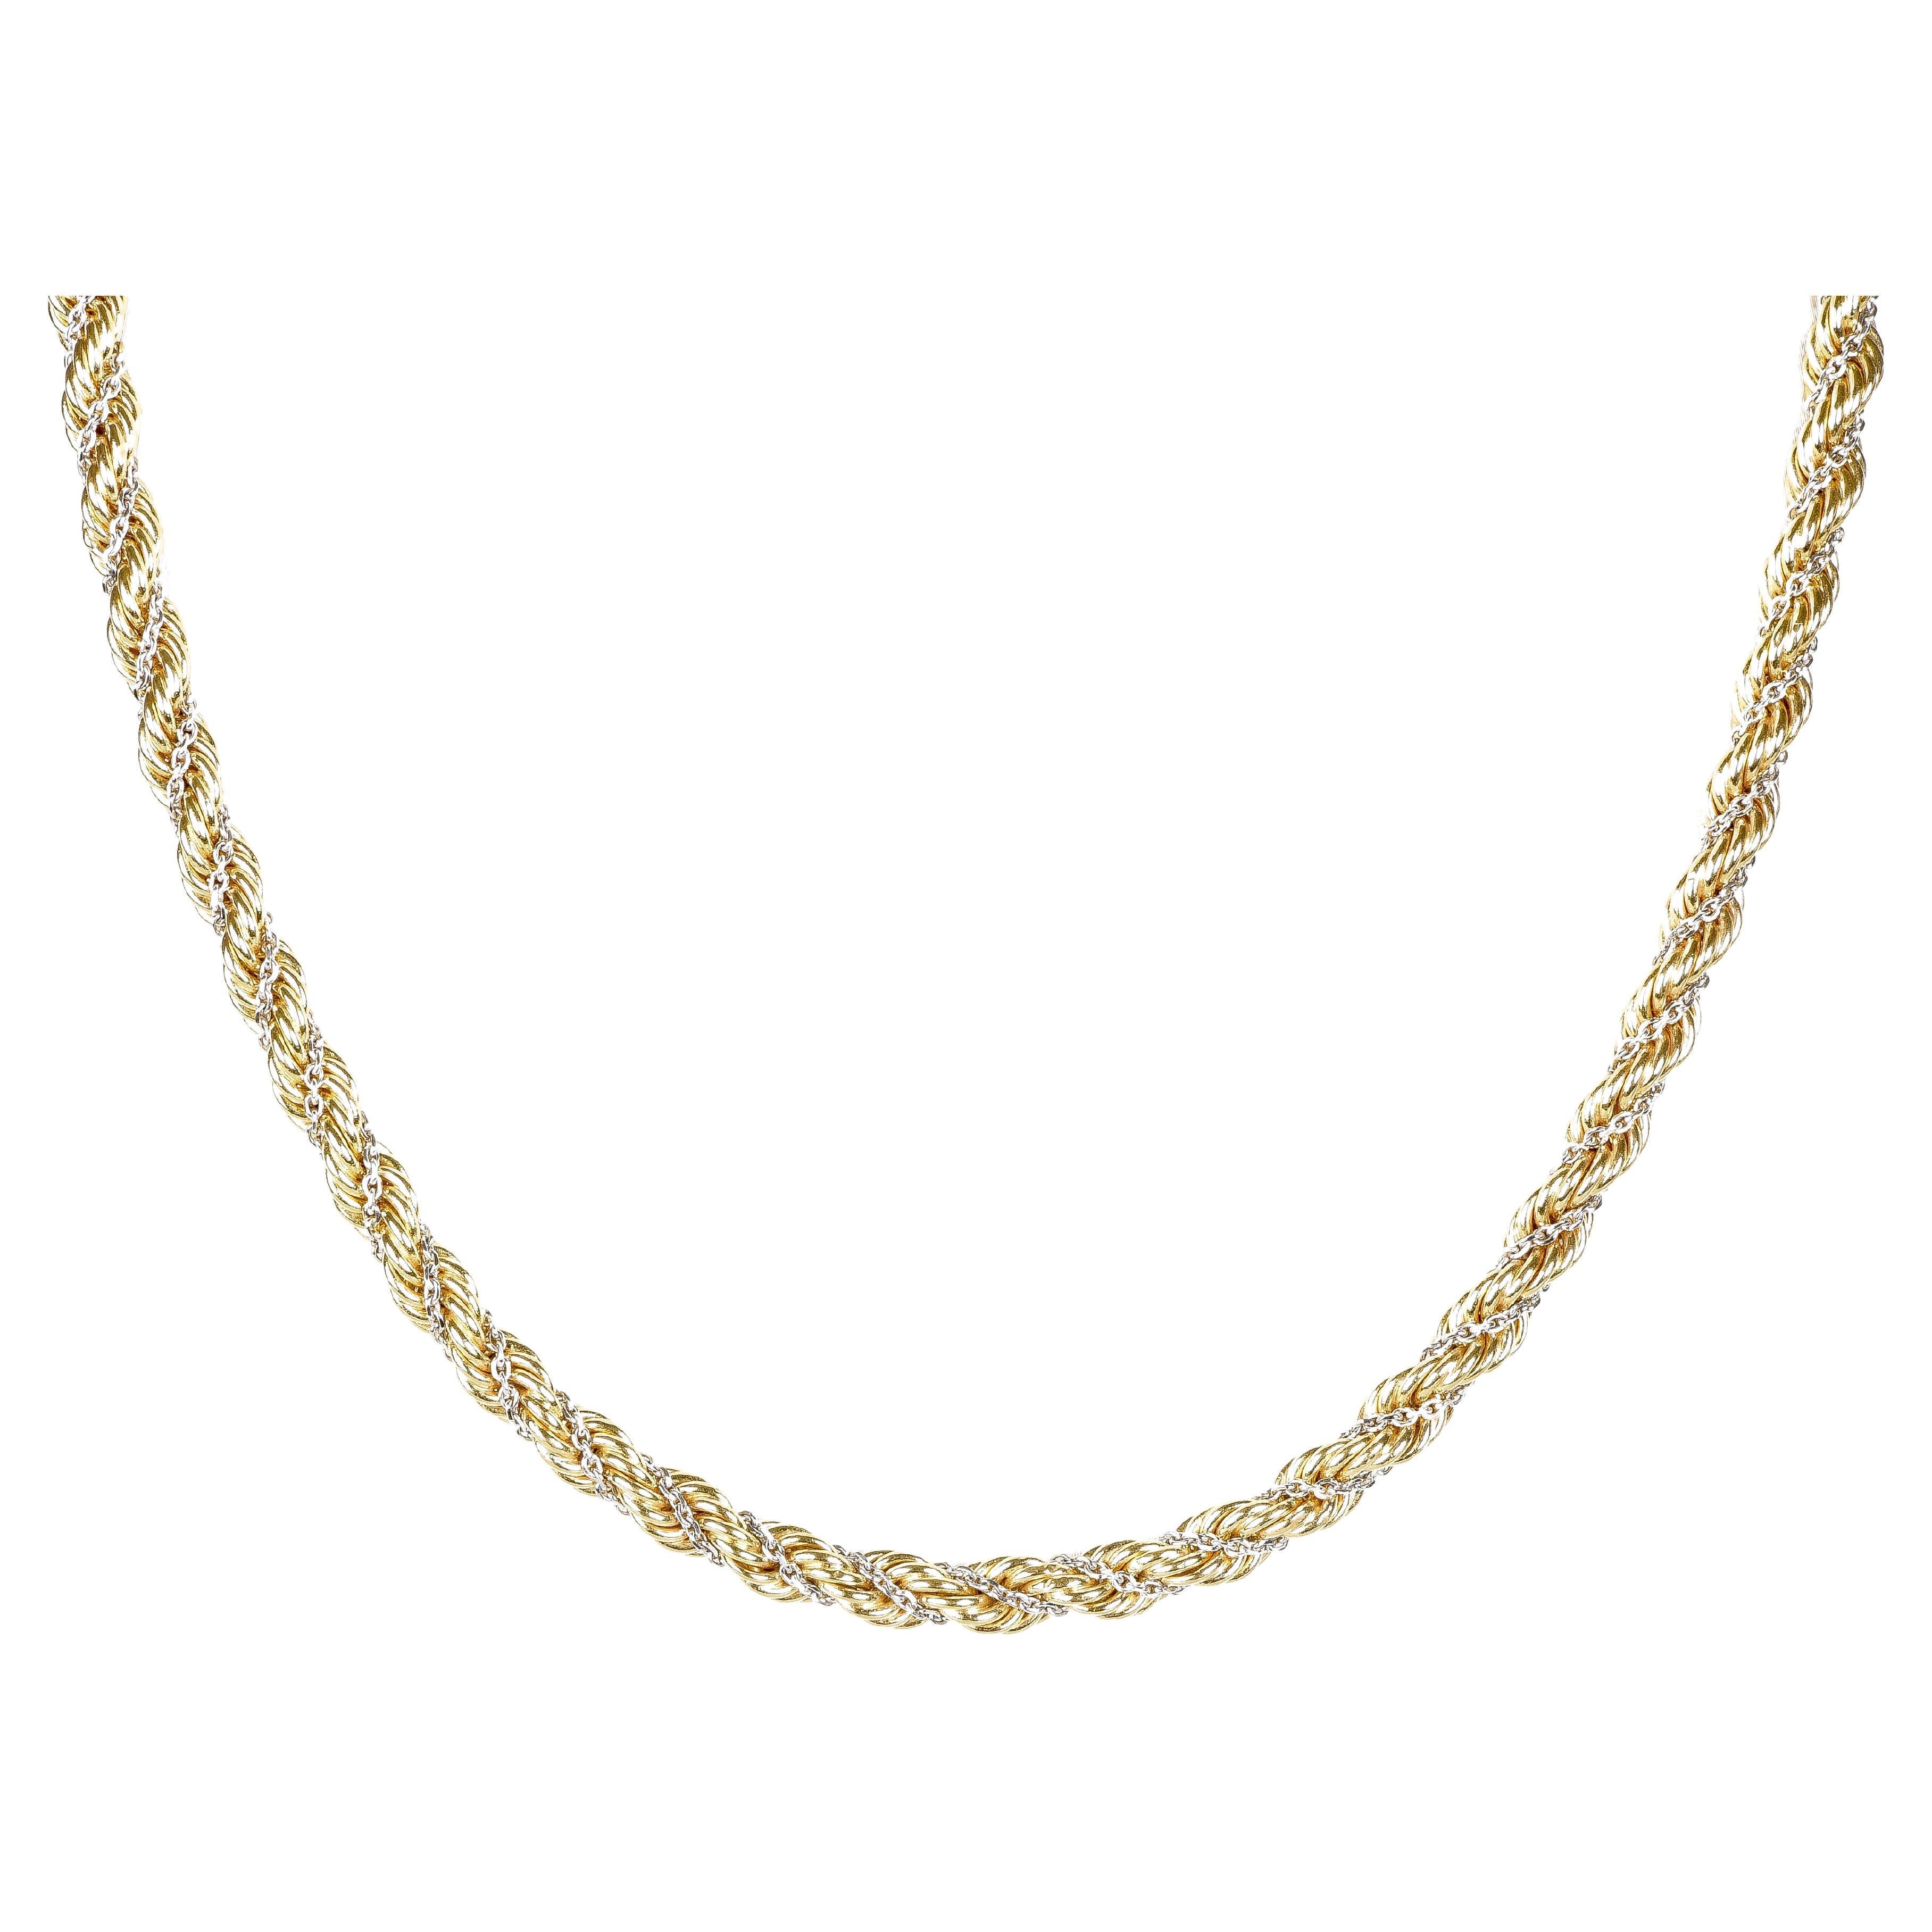 18 carats White and Yellow Gold - Mesh necklace